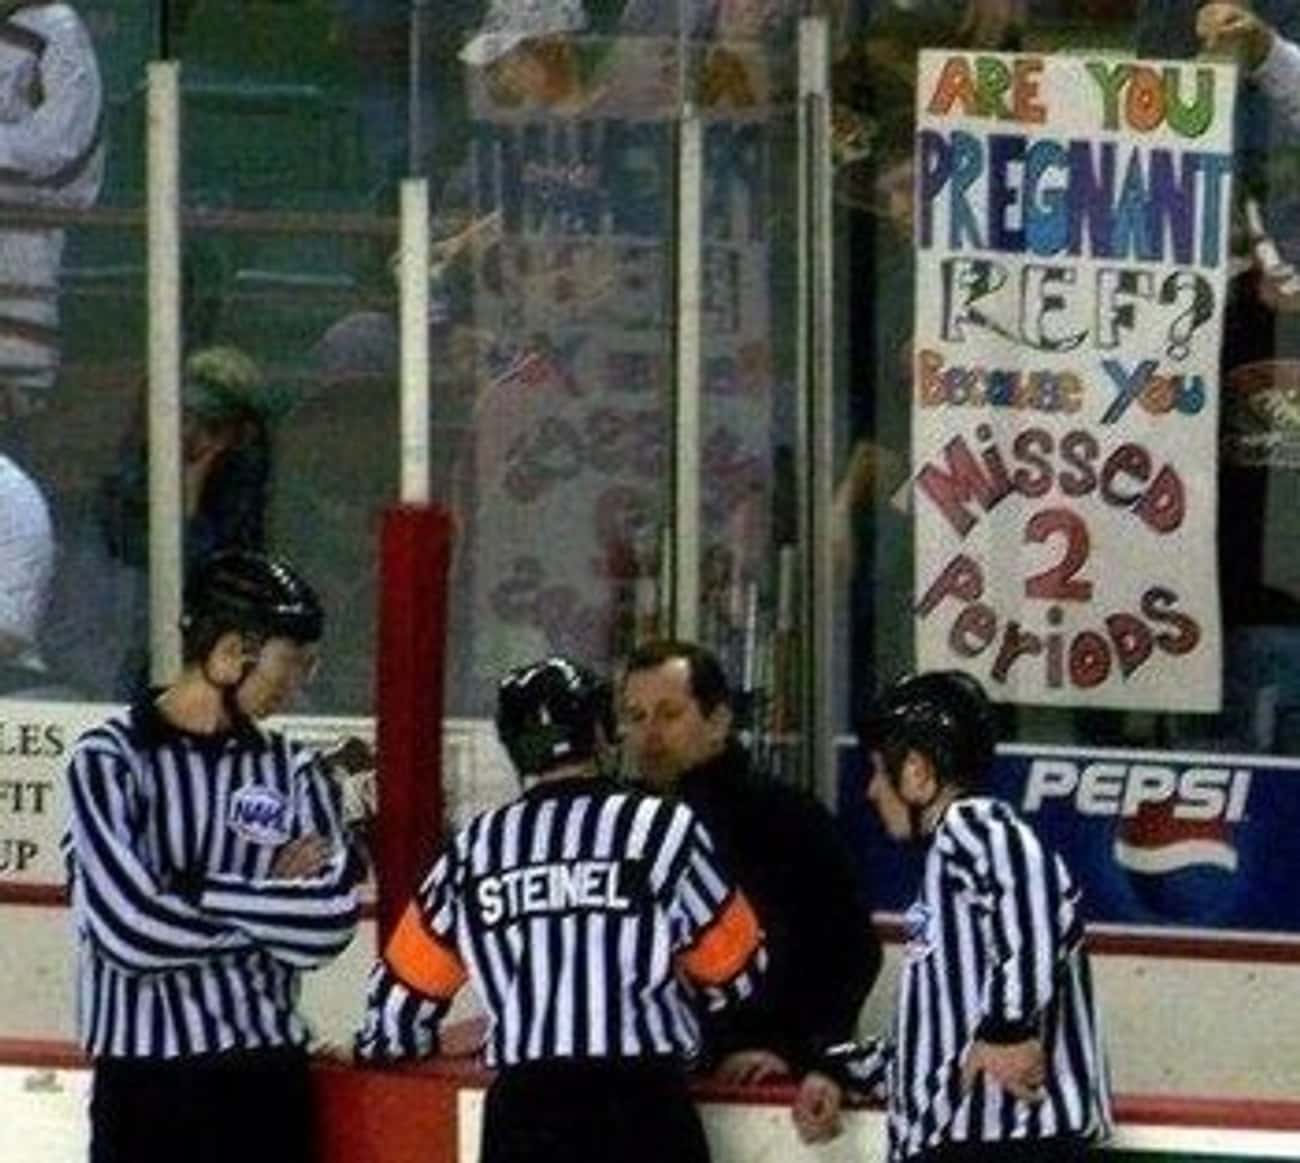 But How Did They Know the Ref Would Make That Specific Mistake?